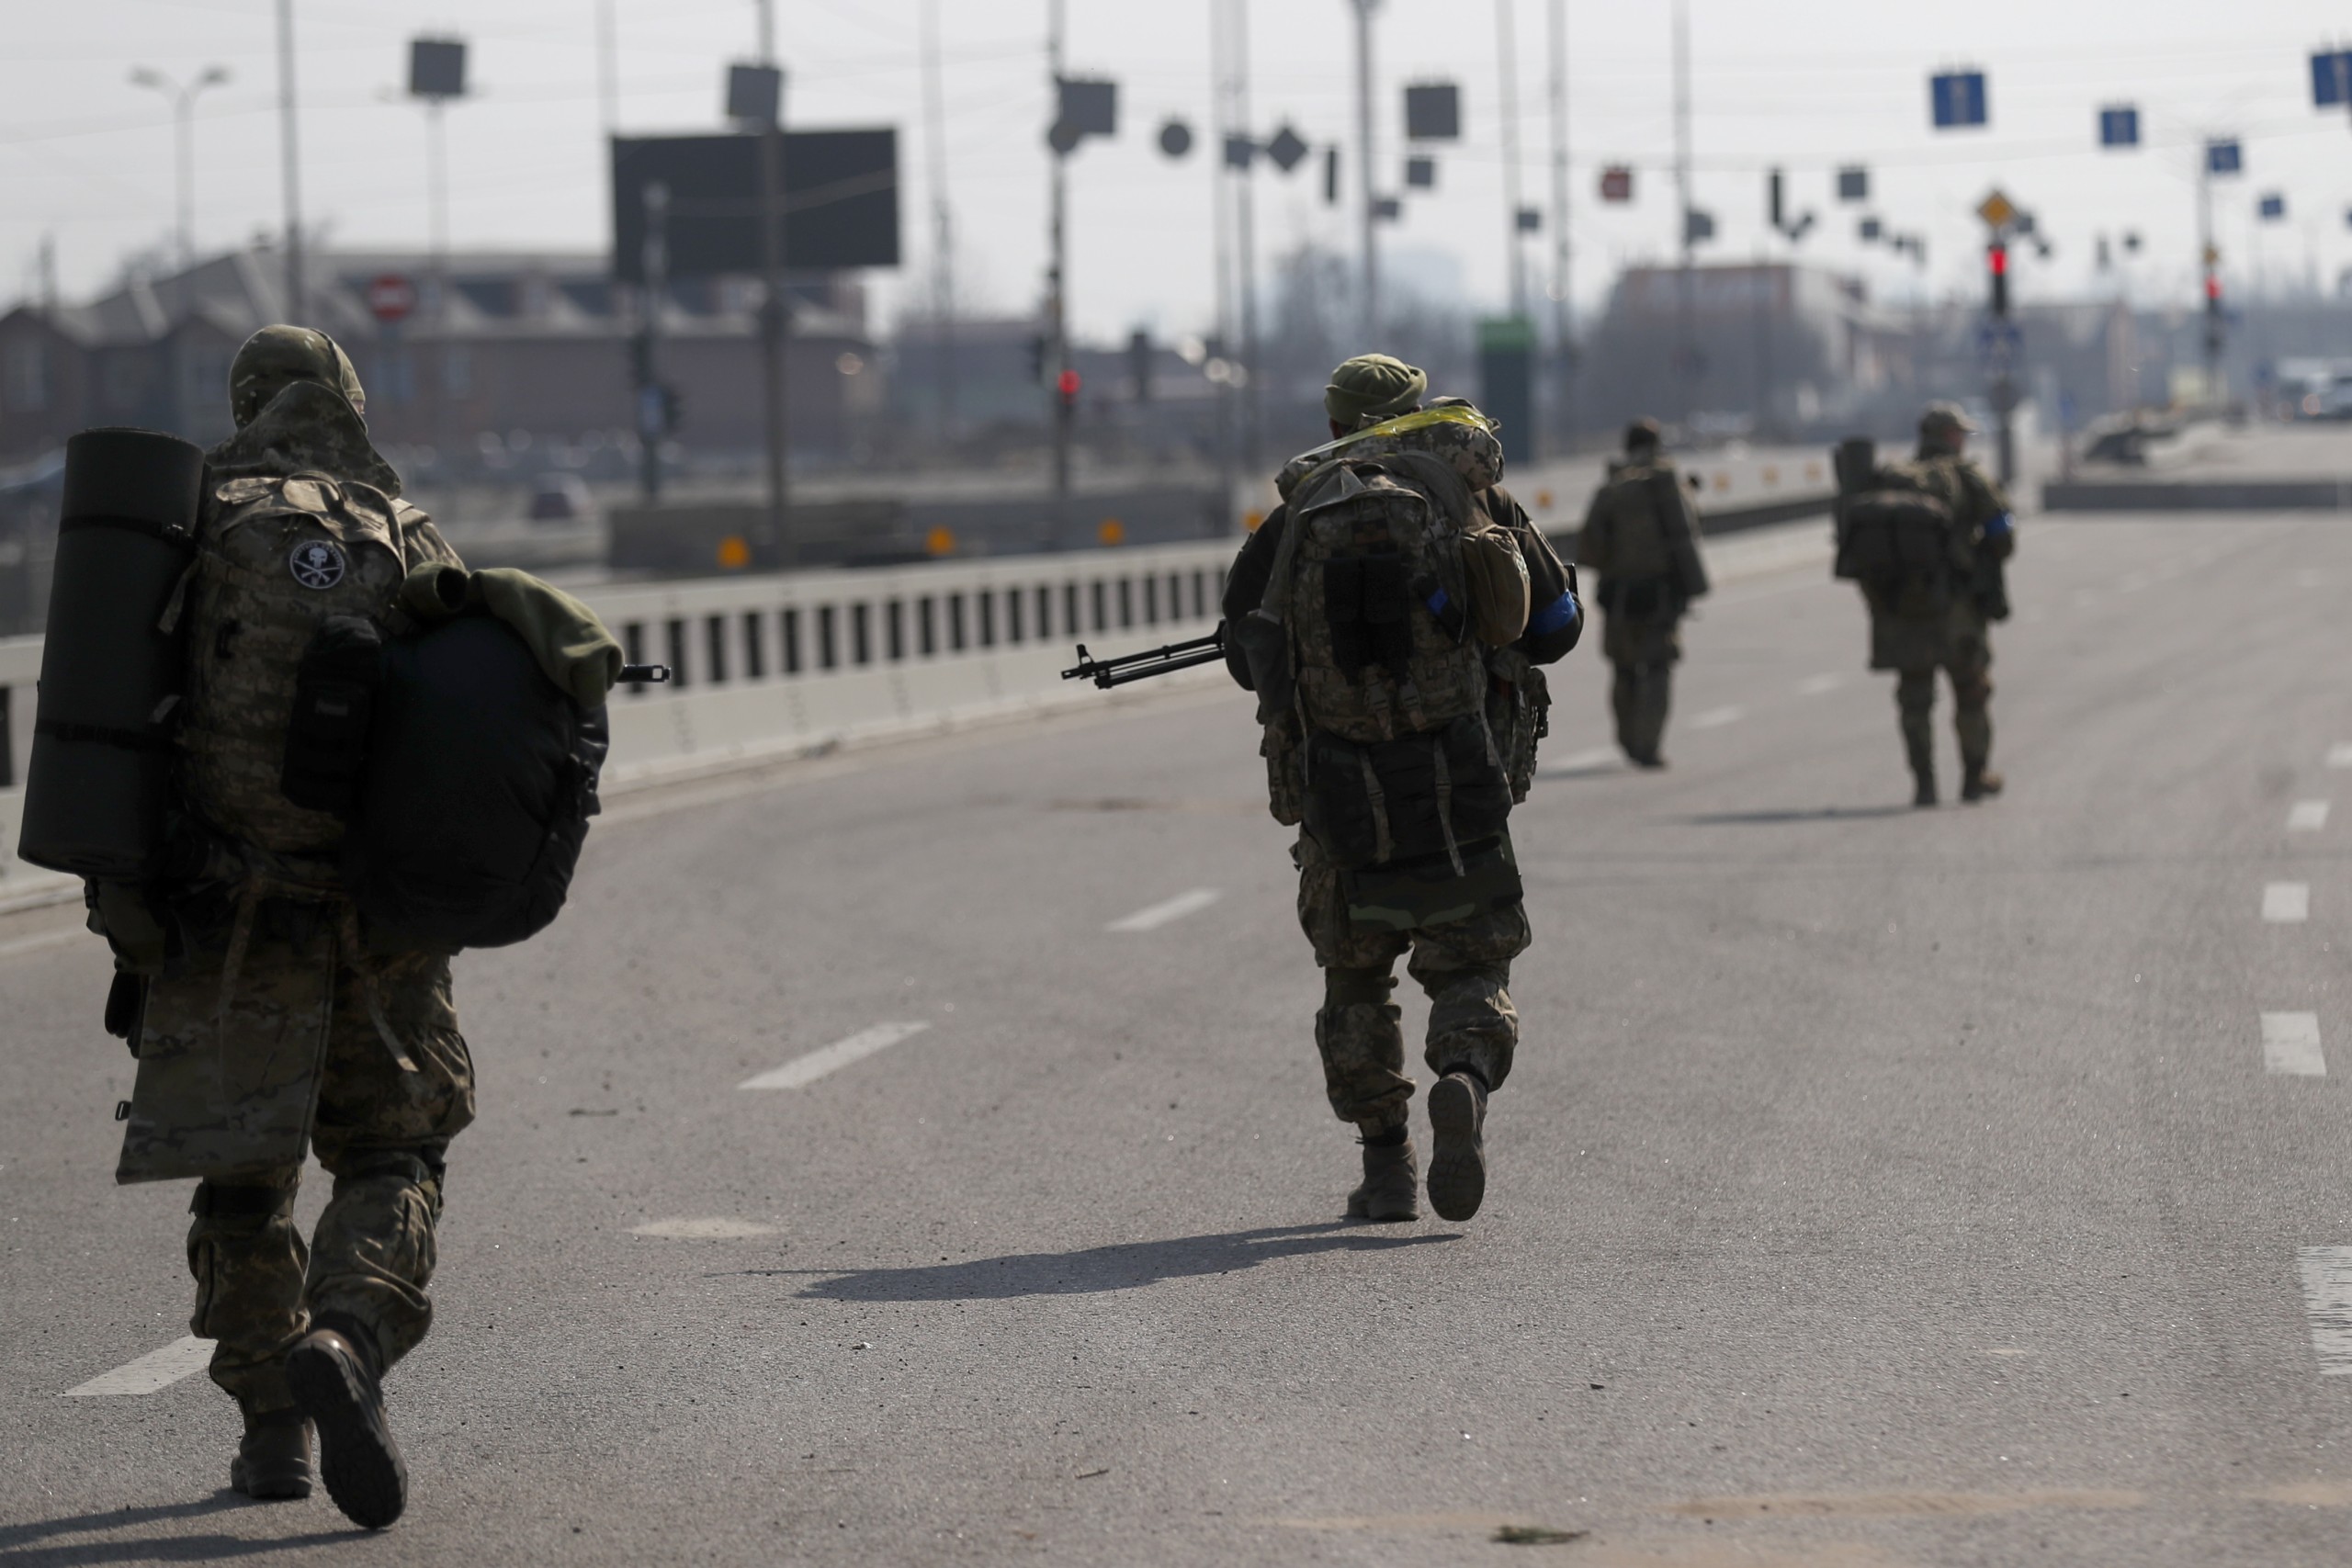 epa09844619 Ukrainian soldiers patrol on the outskirt of Kiev (Kyiv), Ukraine, 23 March 2022. Russian troops entered Ukraine on 24 February prompting the country's president to declare martial law and triggering a series of announcements by Western countries to impose severe economic sanctions on Russia.  EPA/ATEF SAFADI